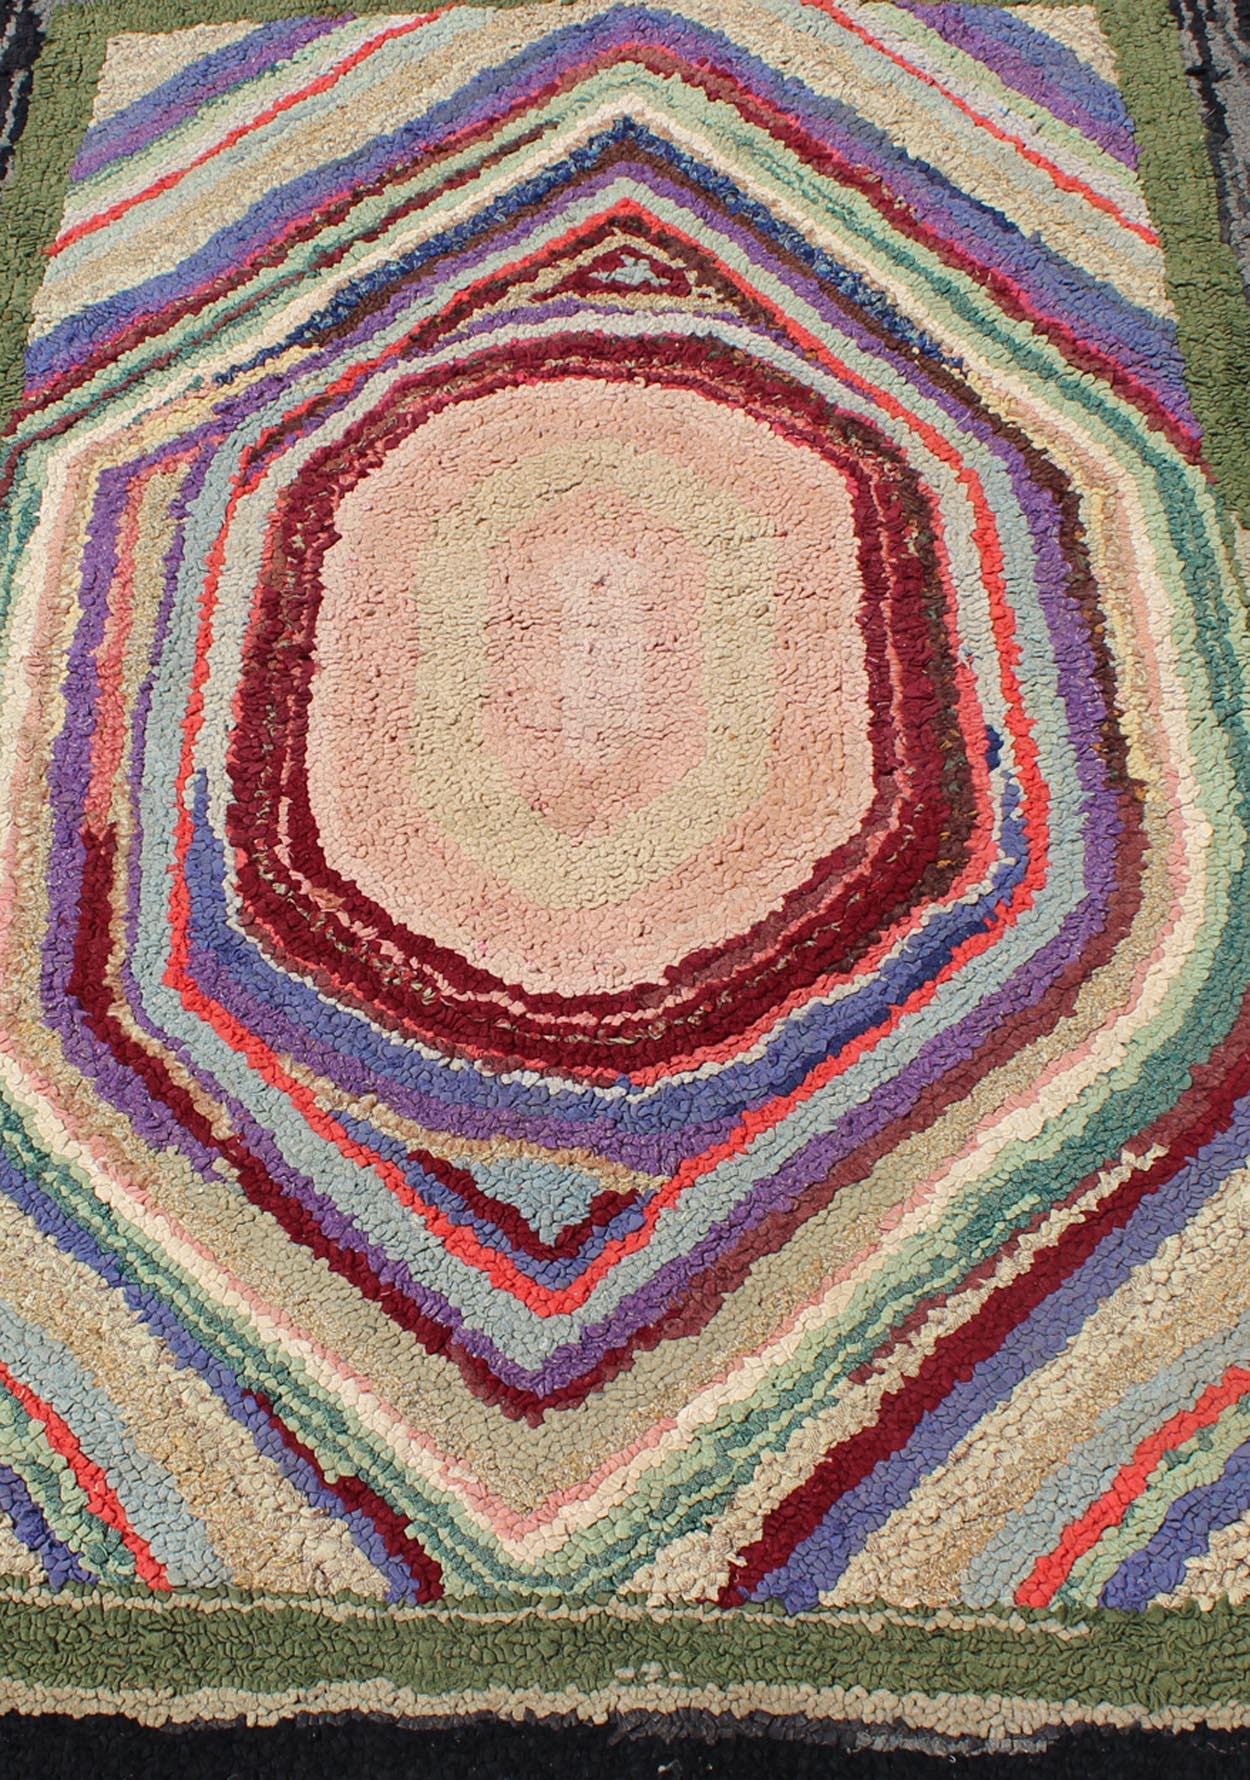 Wool Antique Multicolor American Hooked Rug in Layered Diamond Design & Geometric For Sale